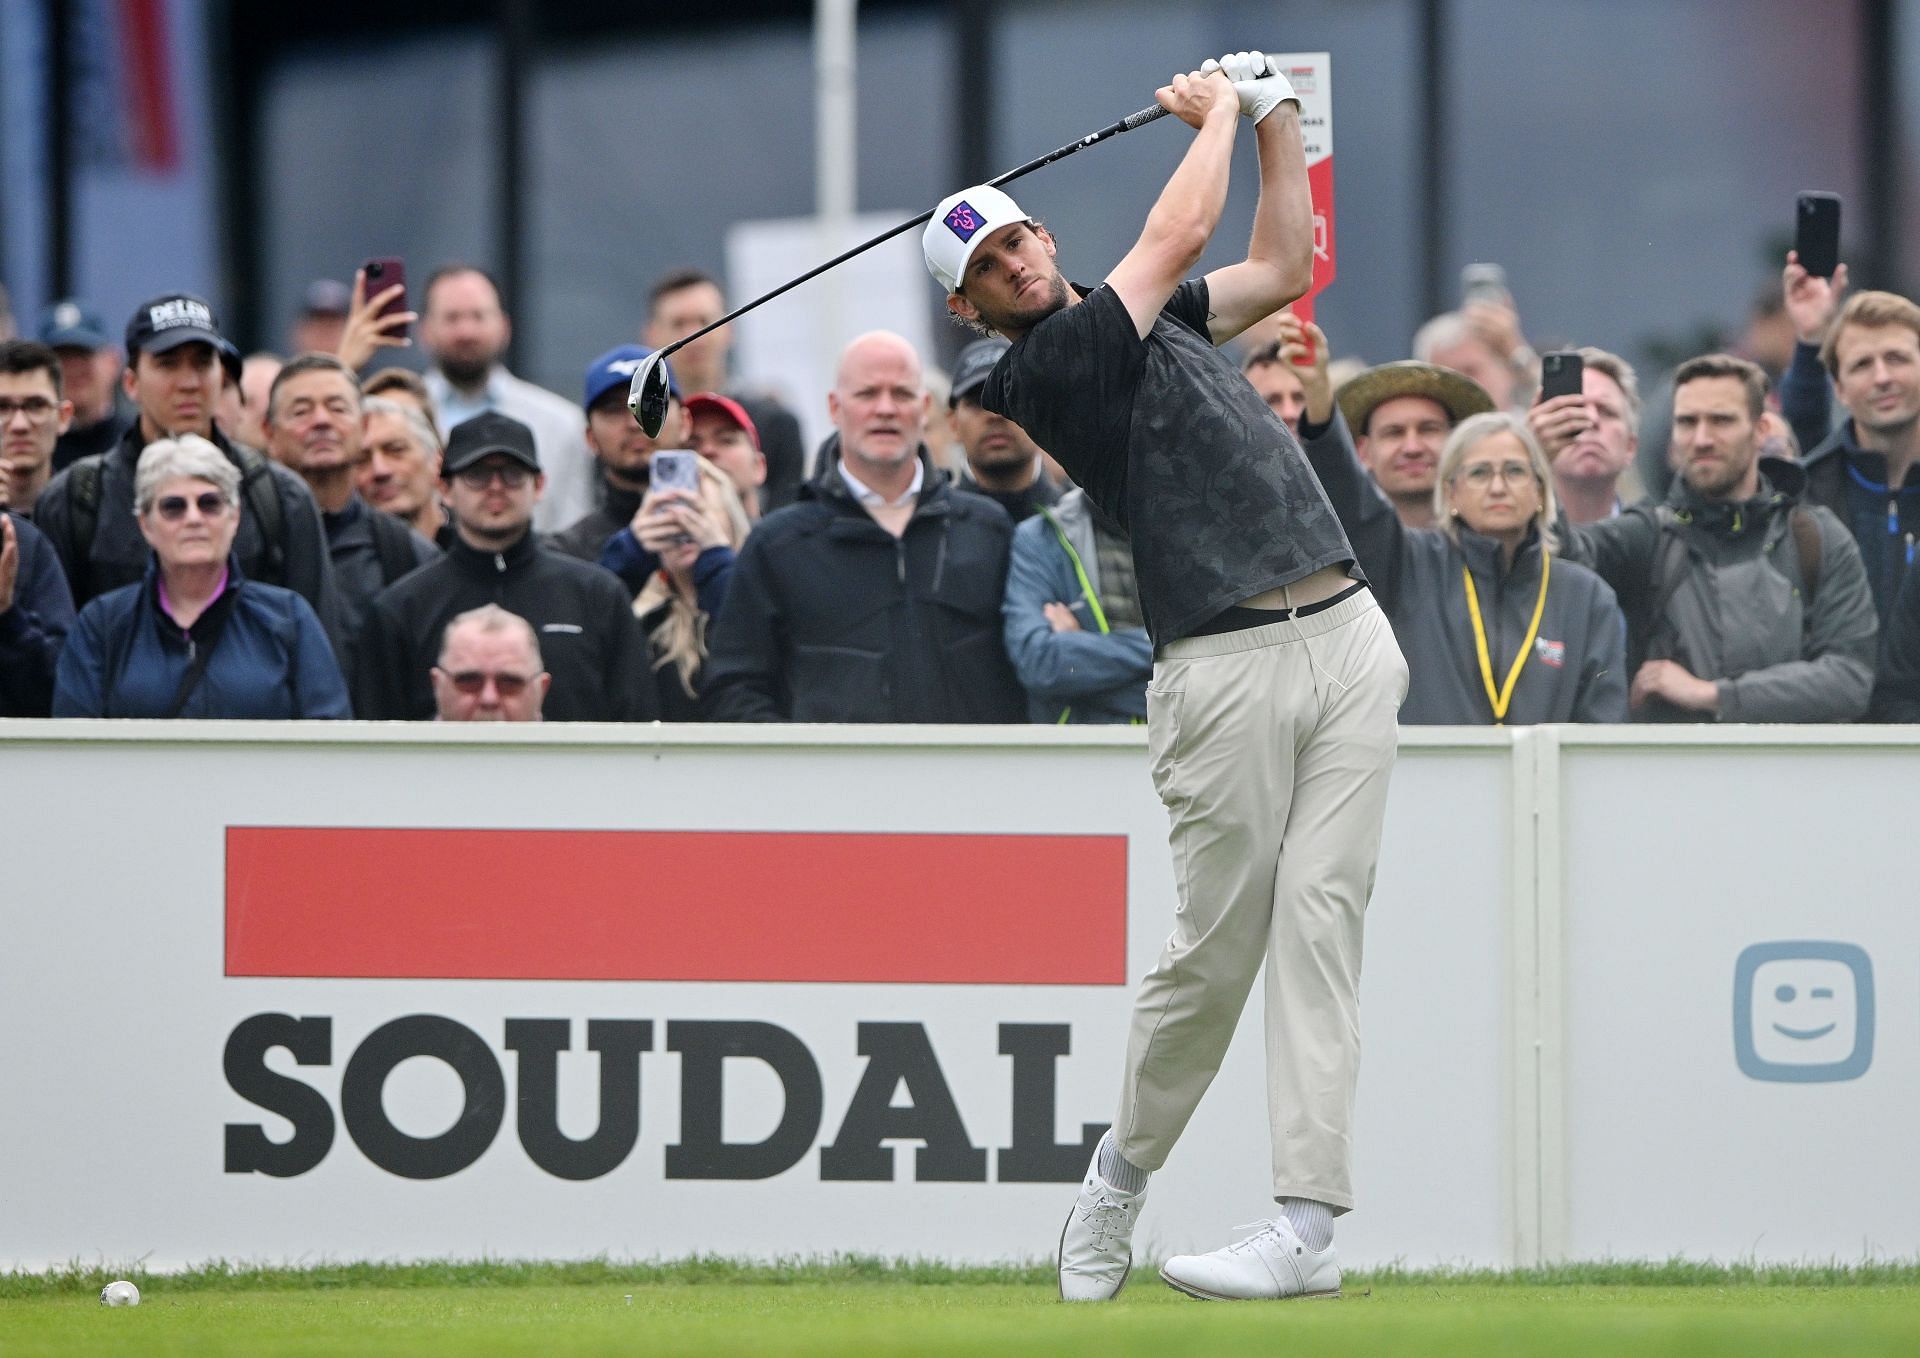 Thomas Pieters at the Soudal Open on the DP World Tour